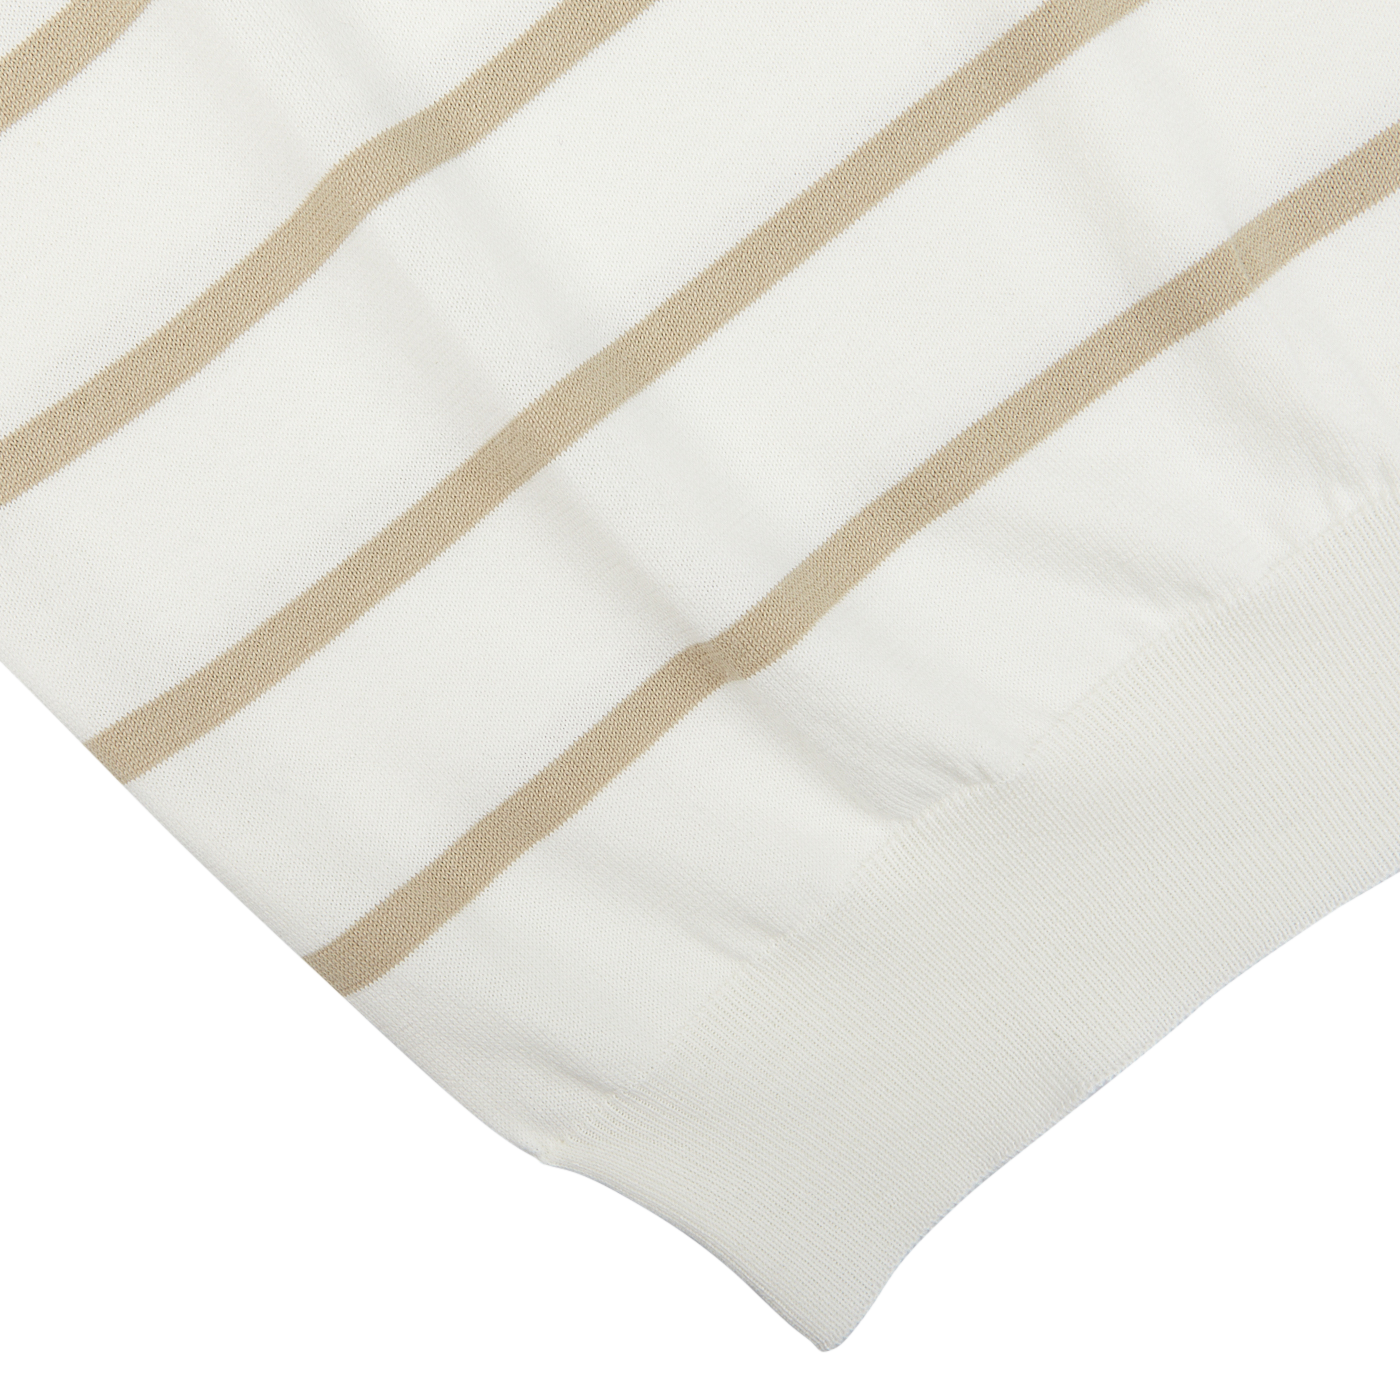 White knitted fabric with tan horizontal stripes.
Cream Beige Striped Organic Cotton T-Shirt by Gran Sasso.